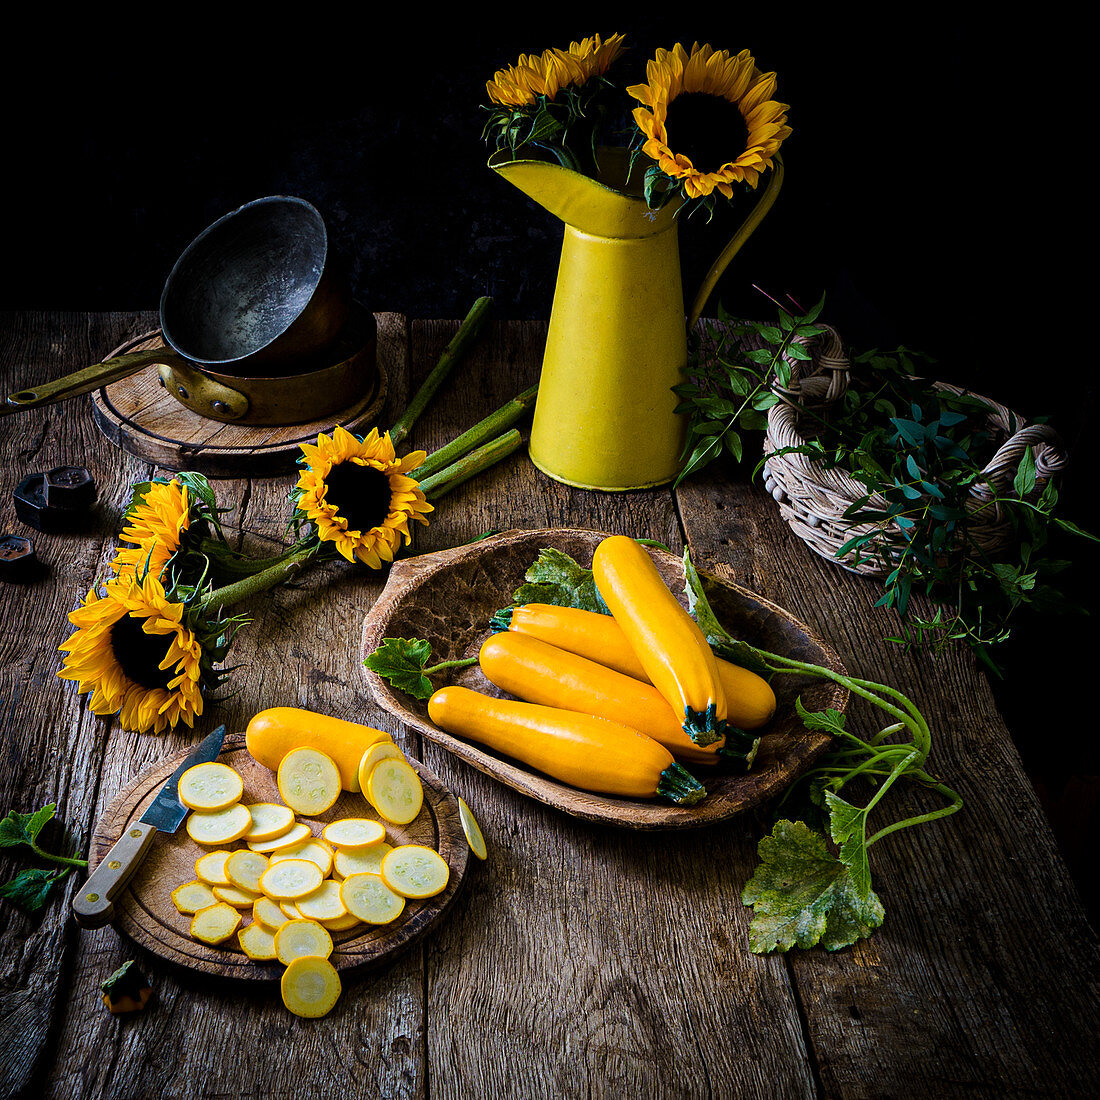 Yellow courgettes chopped with sunflowers